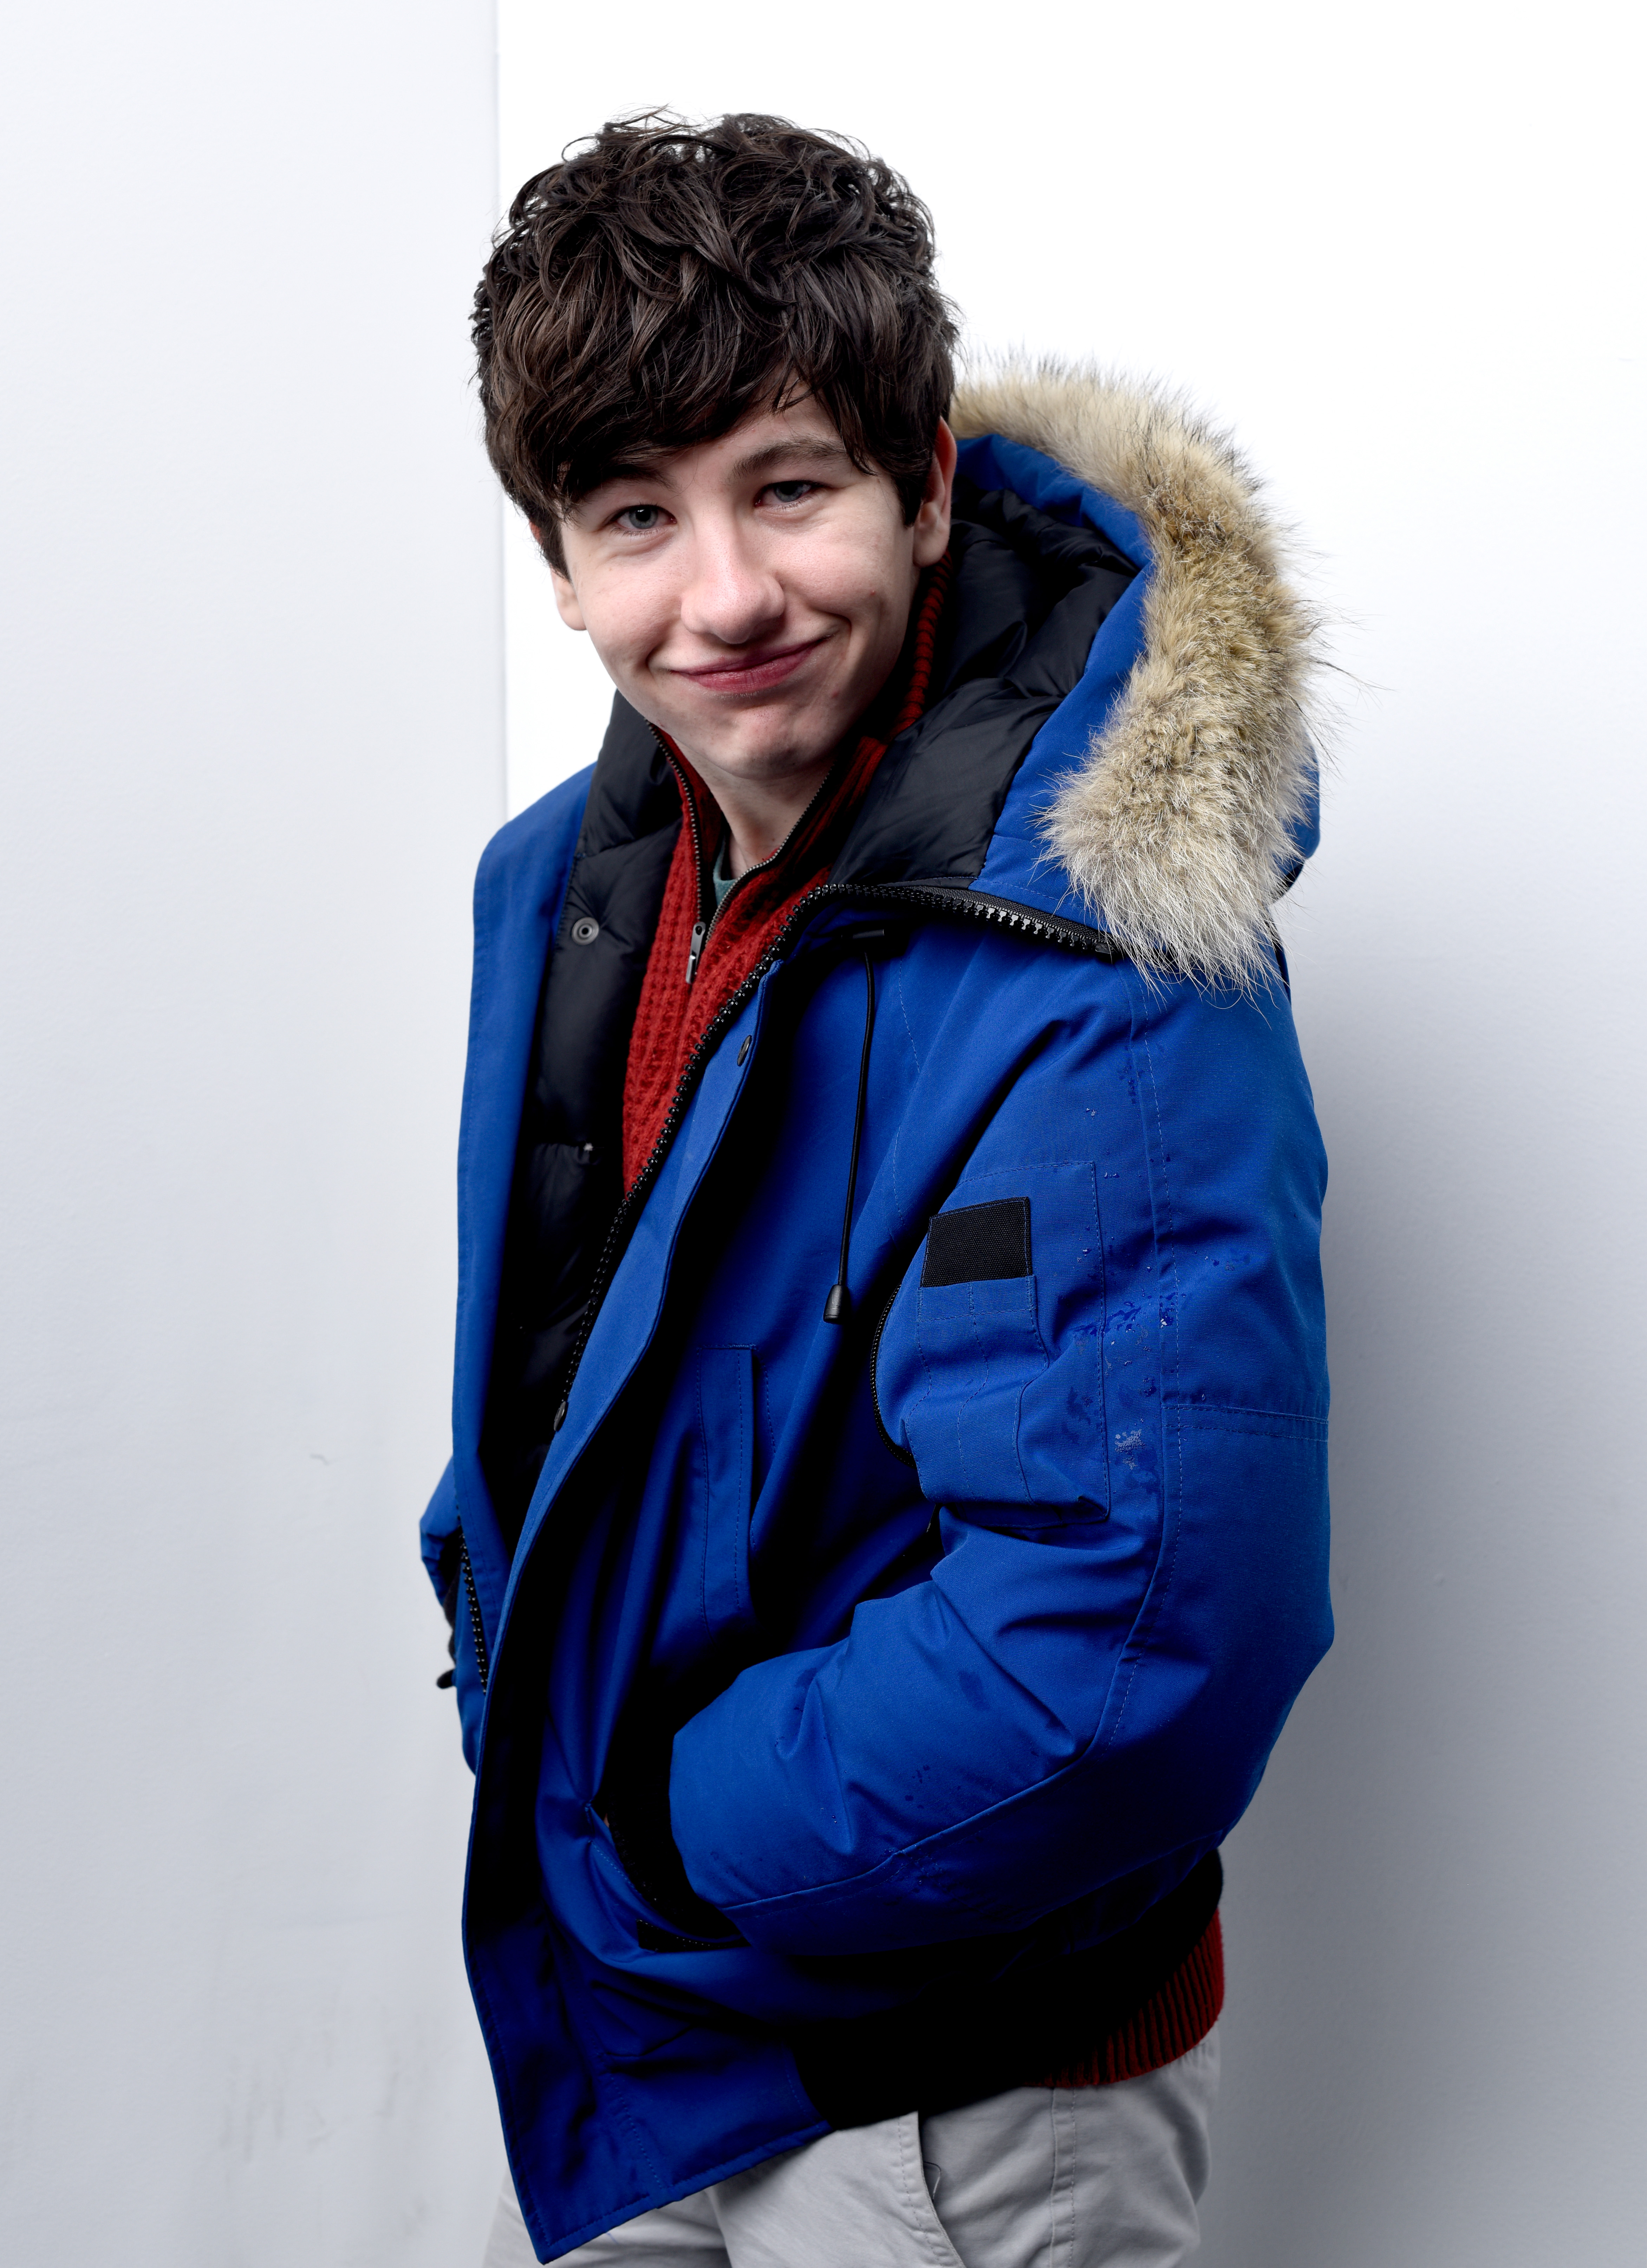 Barry Keoghan poses during a portrait session on January 23, 2016 in Park City, Utah | Source: Getty Images